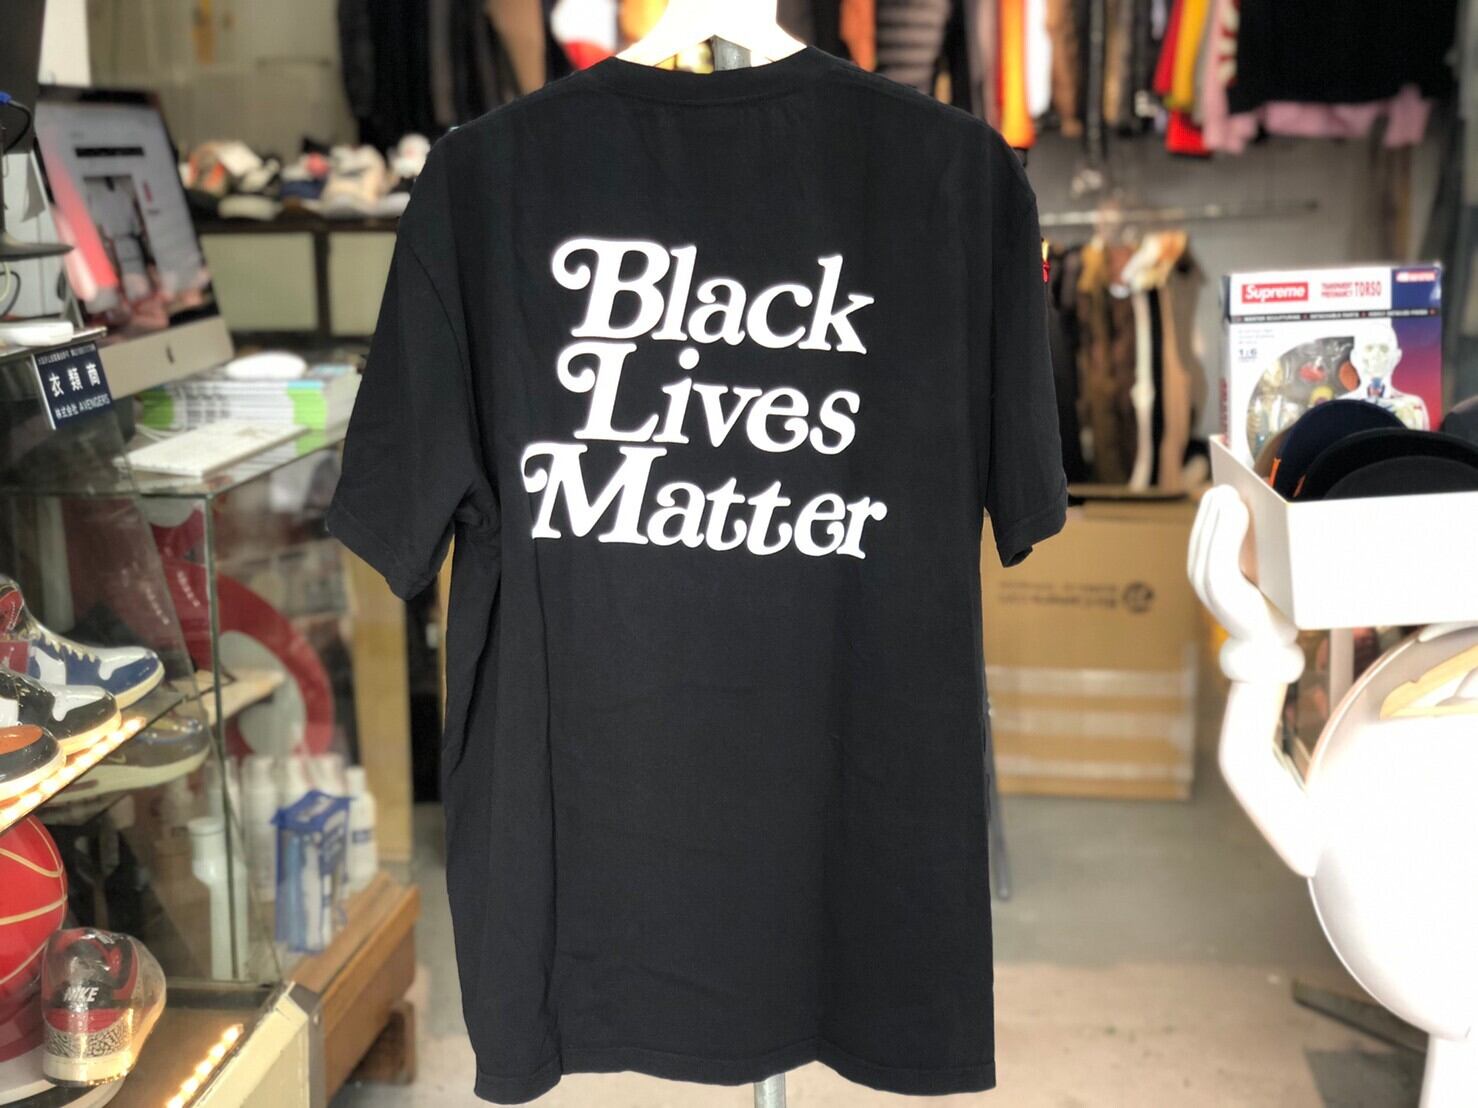 GIRLS DON'T CRY BLACK LIVES MATTER TEE